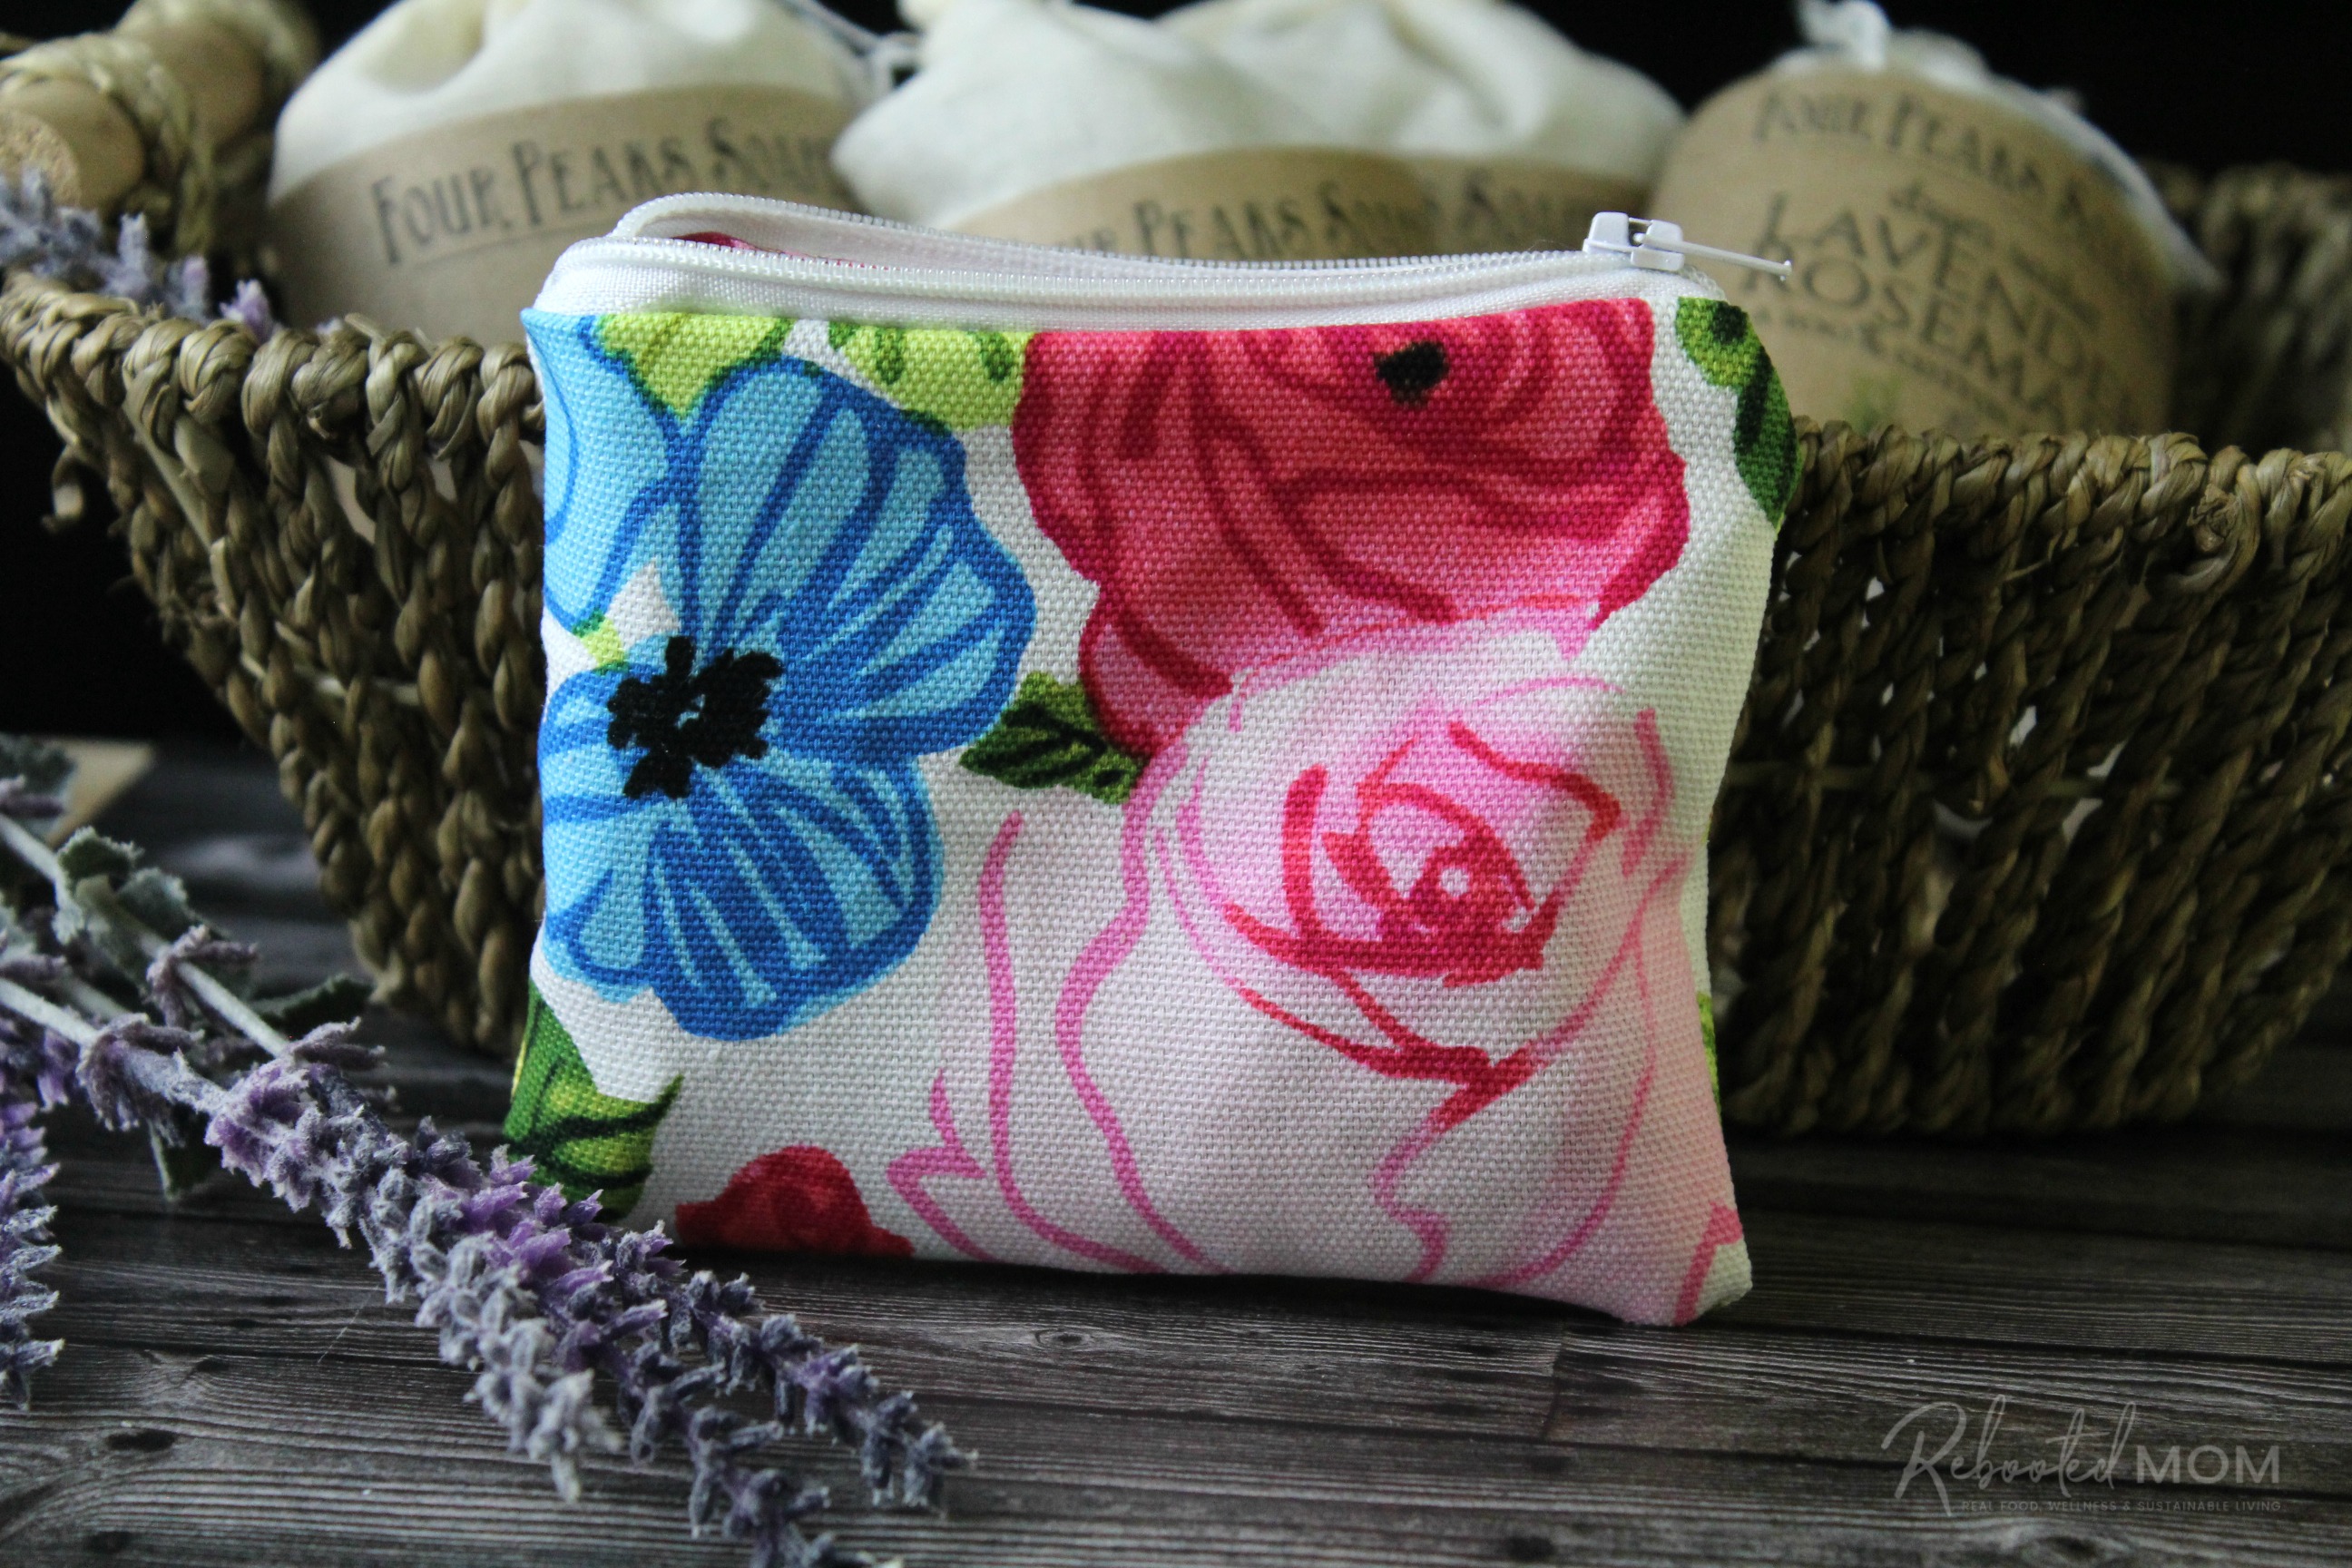 Small zipper pouch with roses